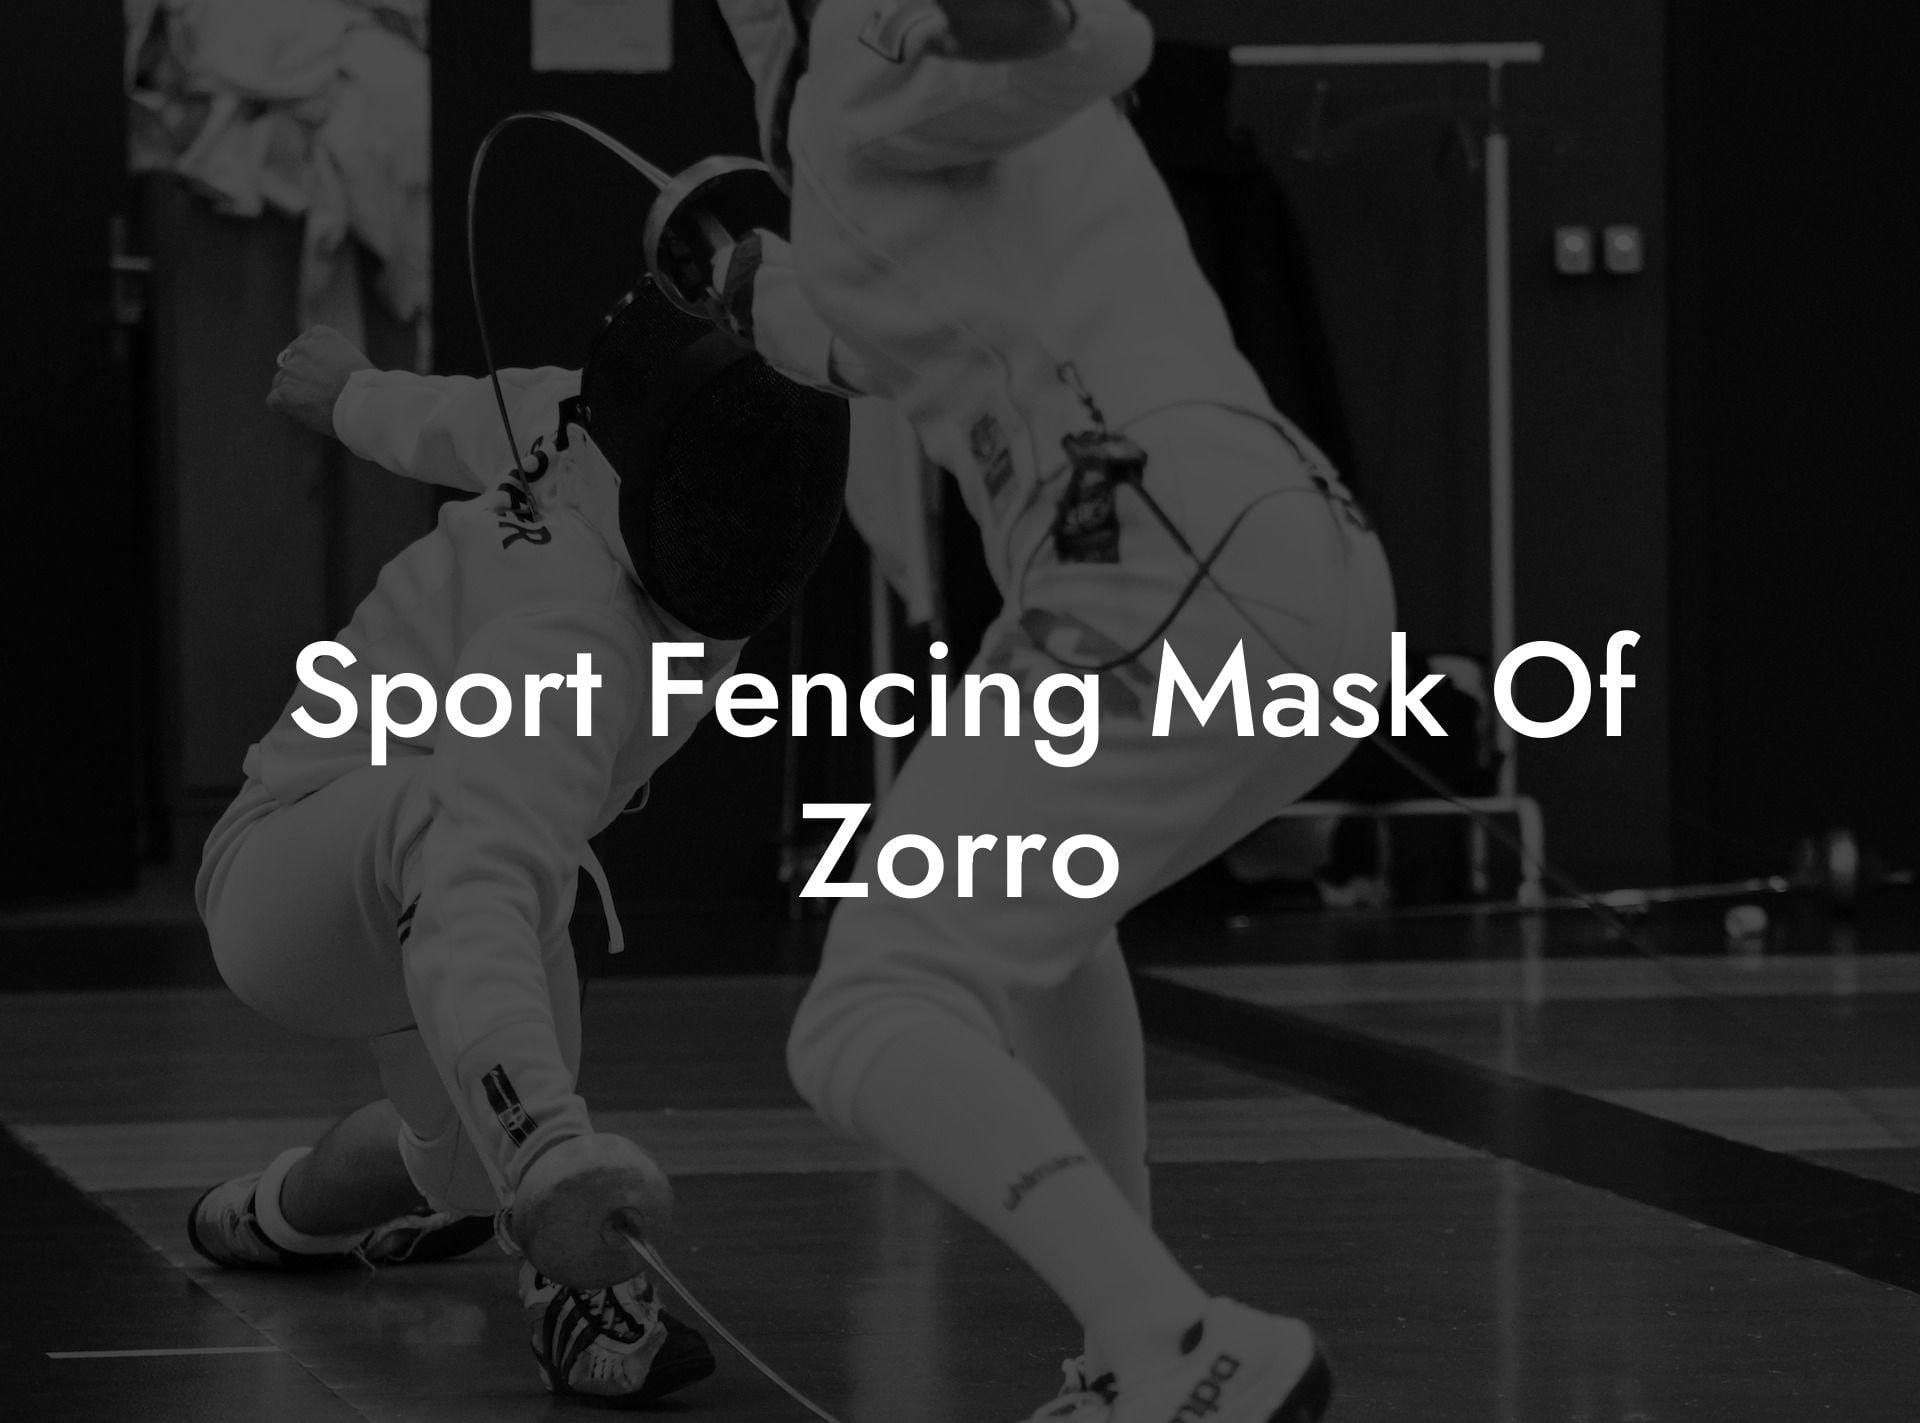 Sport Fencing Mask Of Zorro